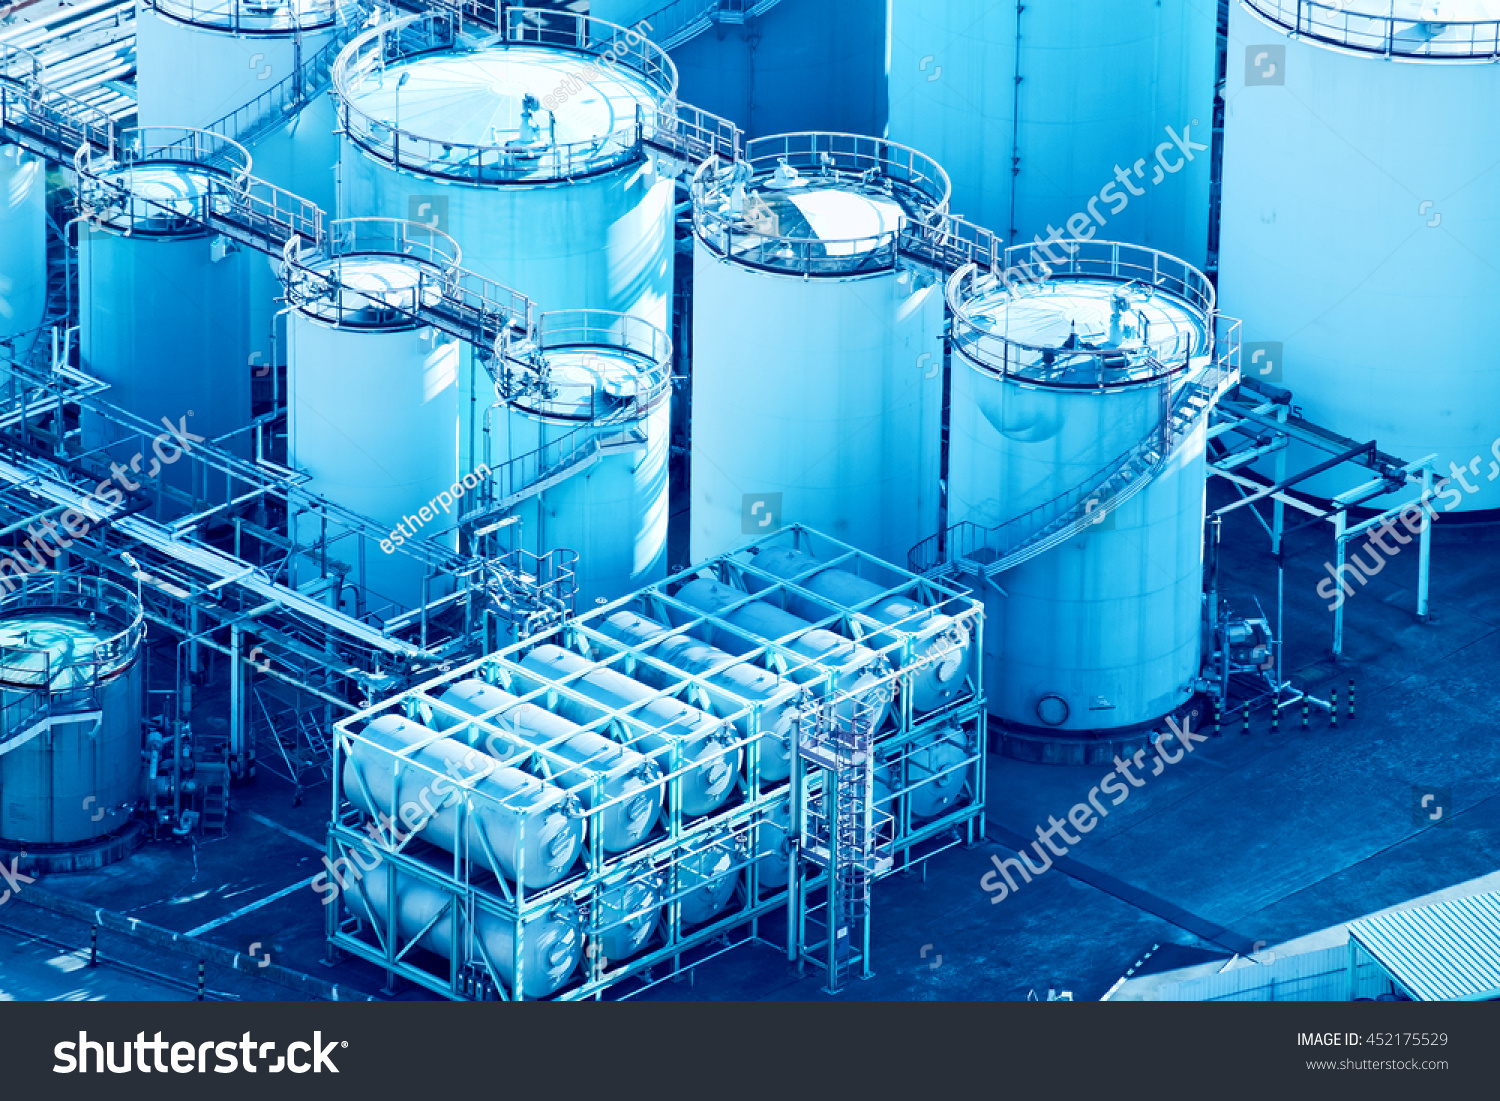 EU stock photo oil and gas industry 452175529 - business consulting1